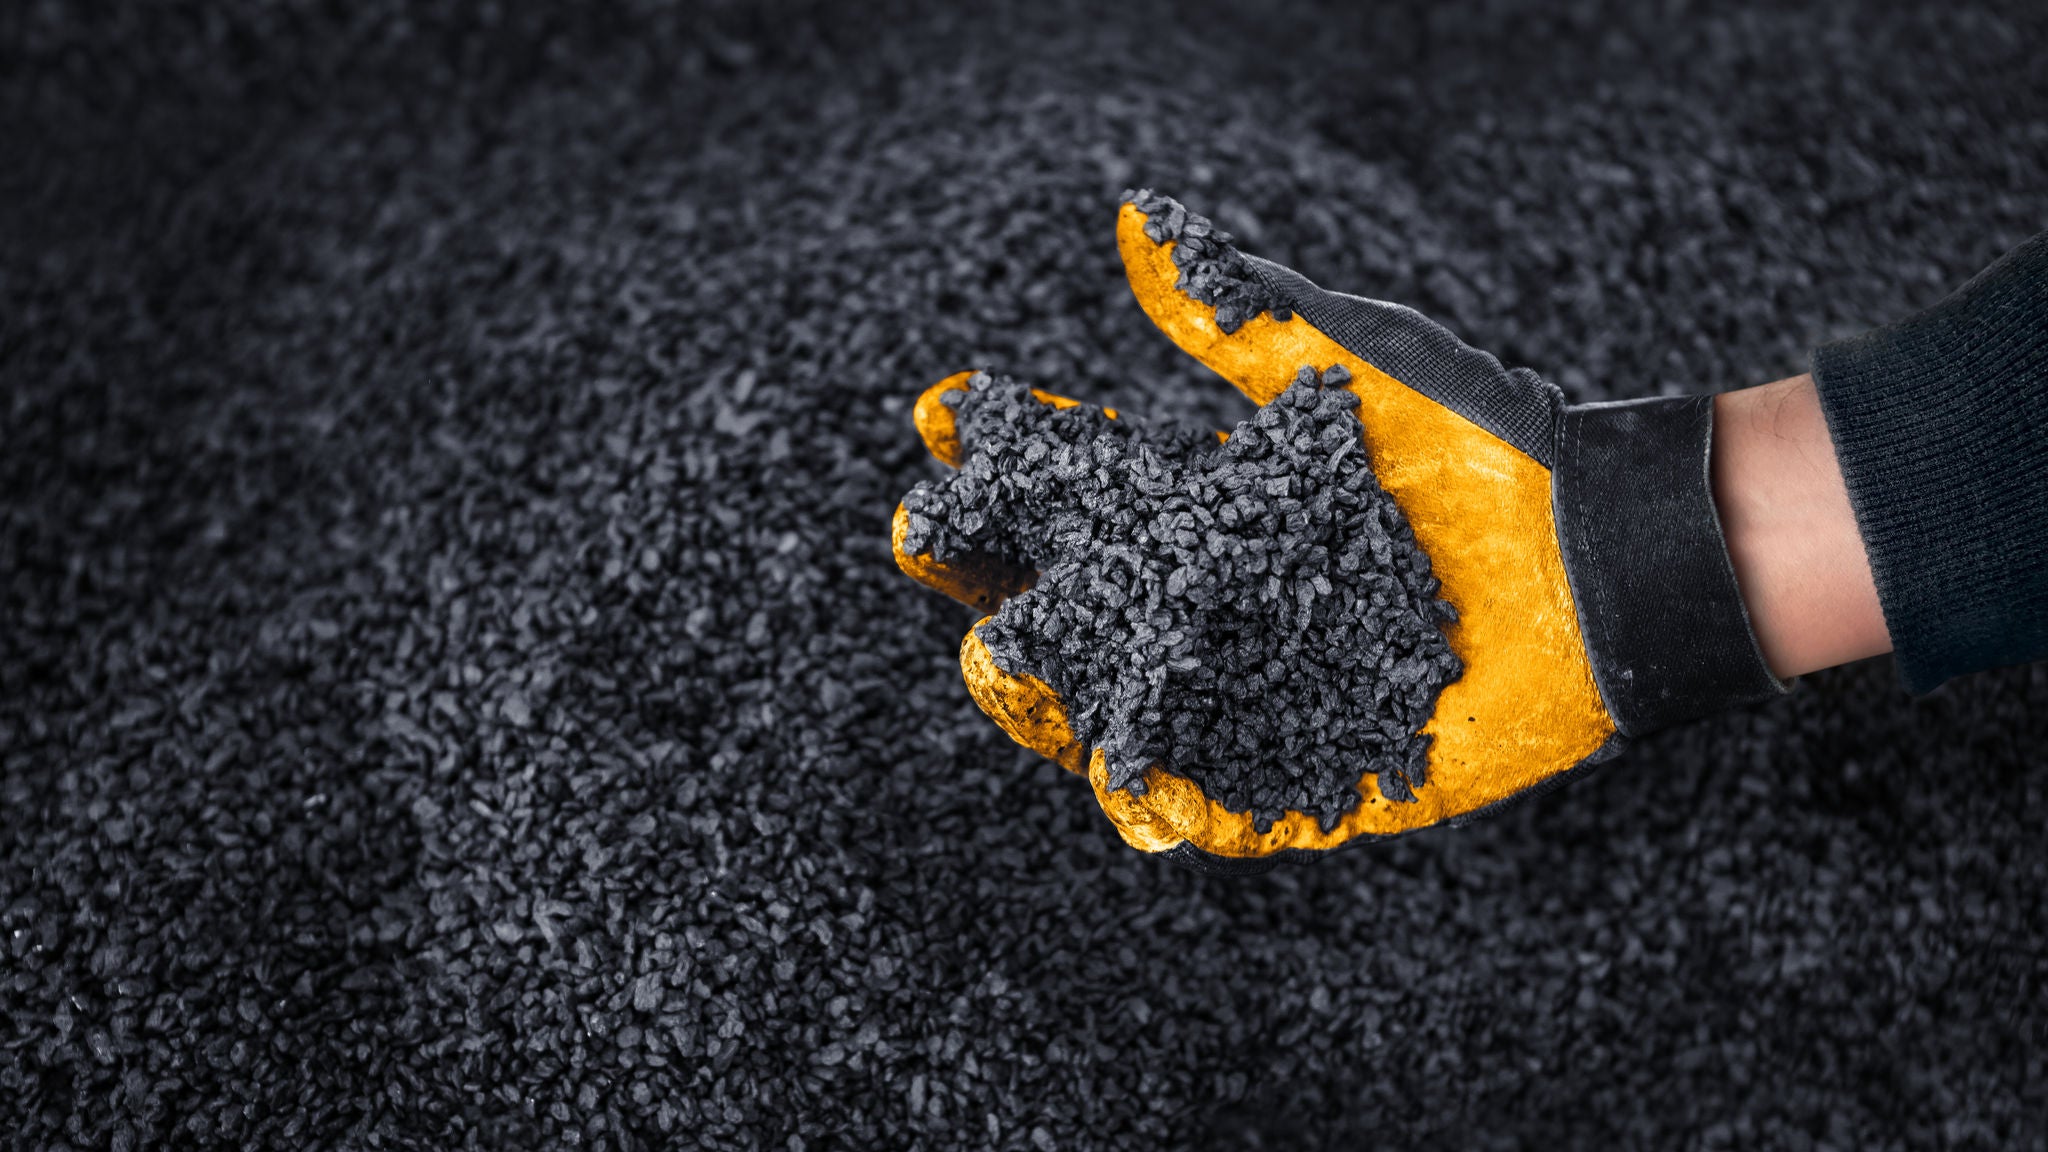 A hand with safety glove reaches into remnants of scrap tires